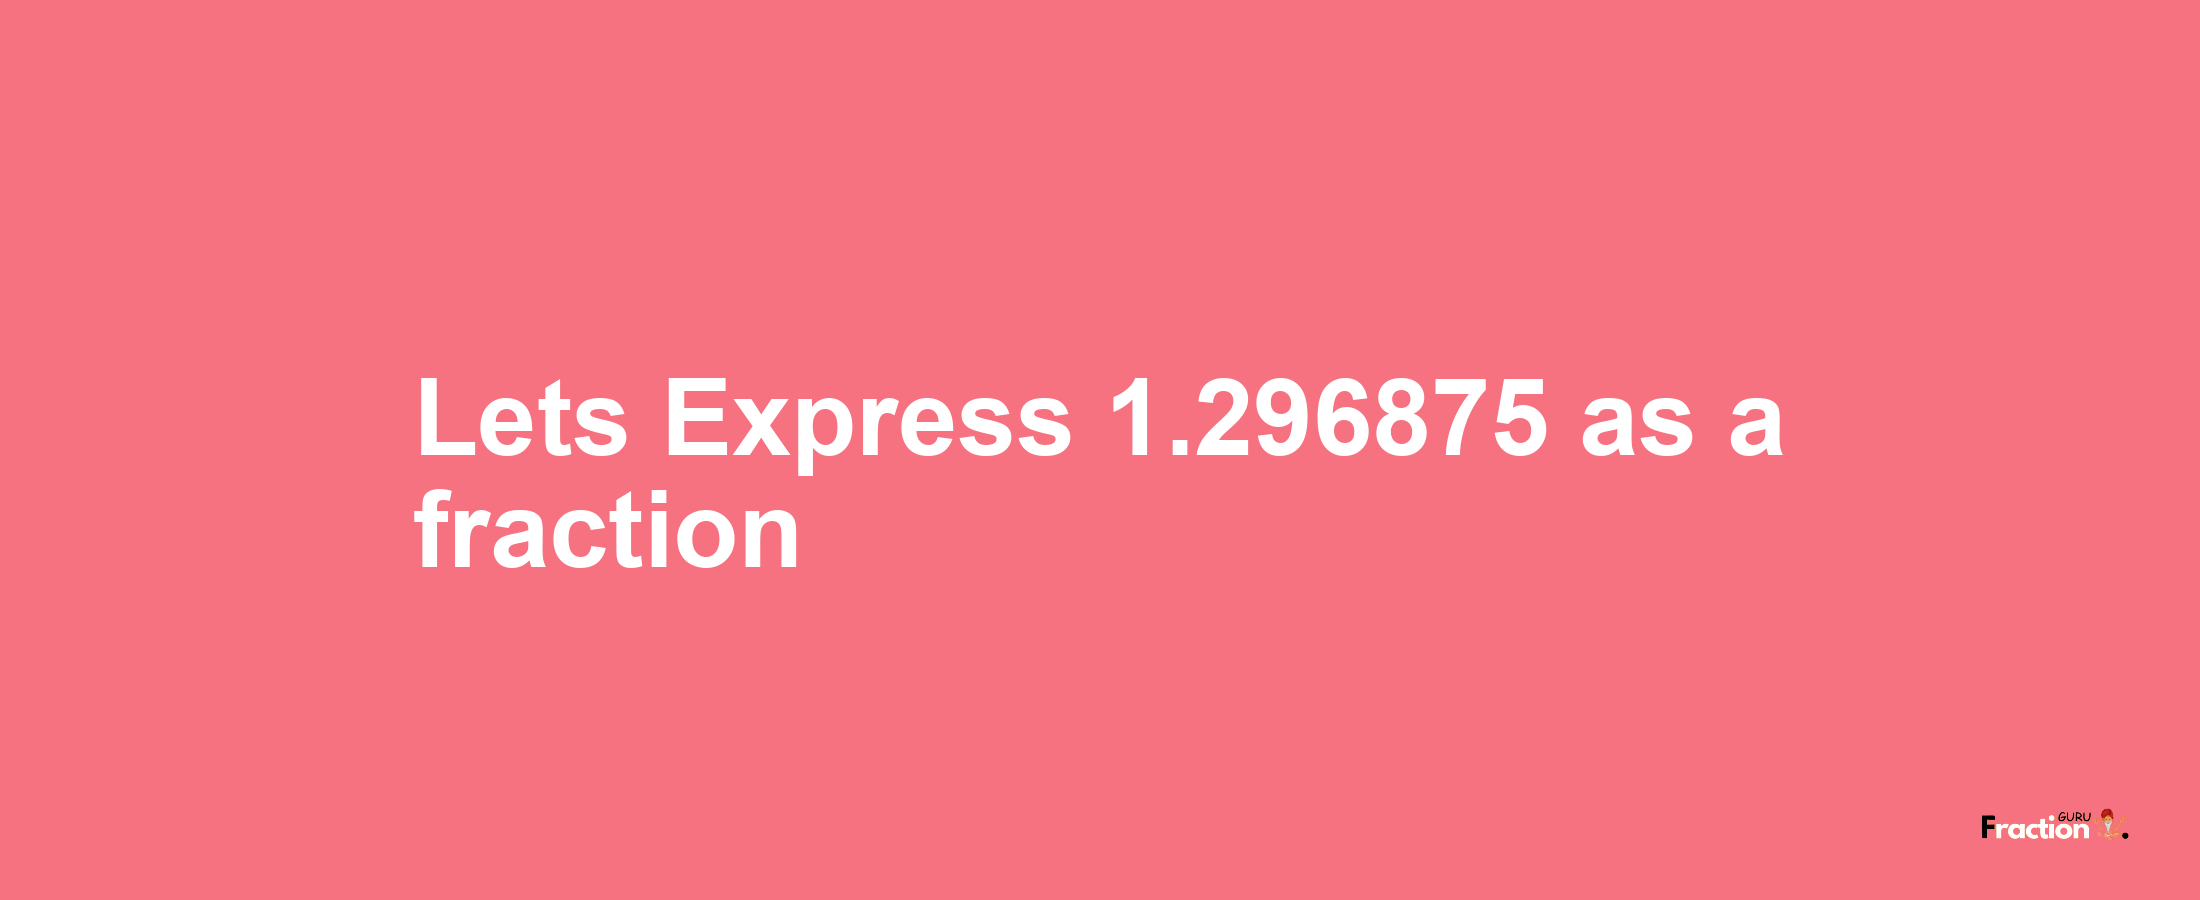 Lets Express 1.296875 as afraction